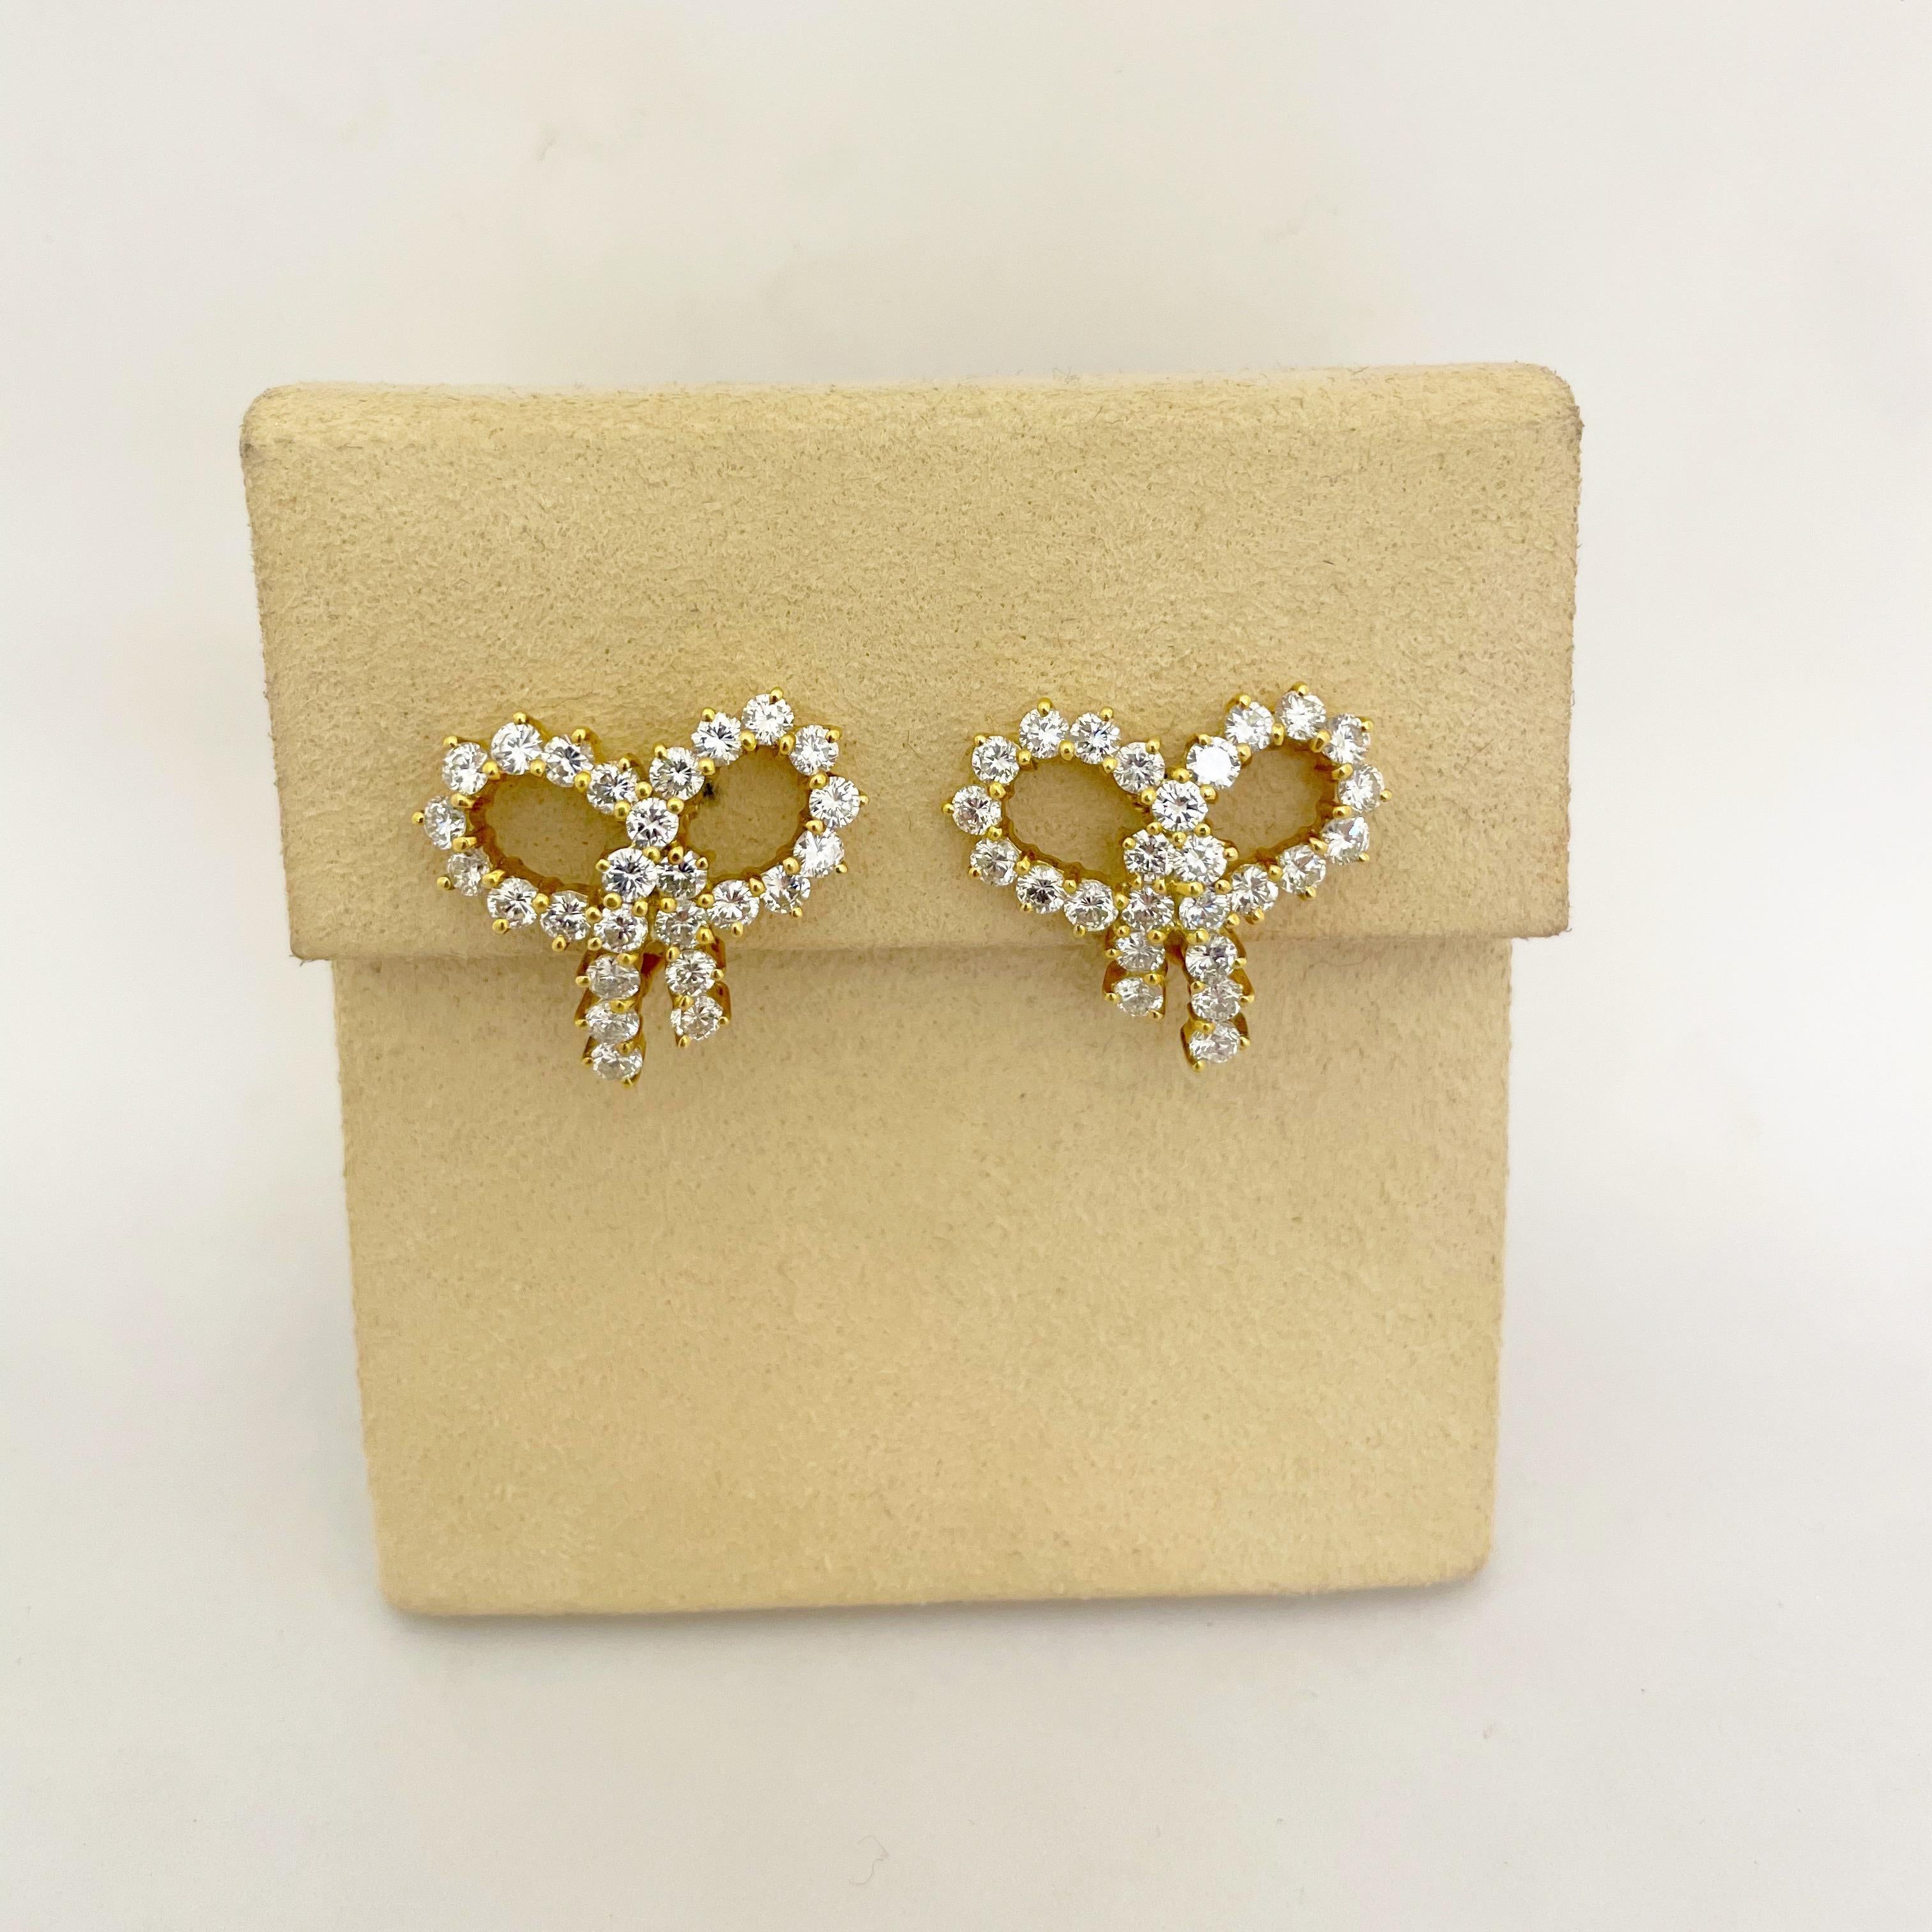 Classic and timeless best describe these 18 karat yellow gold earrings. Round brilliant diamonds ,each in a 3 prong setting form these very feminine bow earrings. The bow measures 1